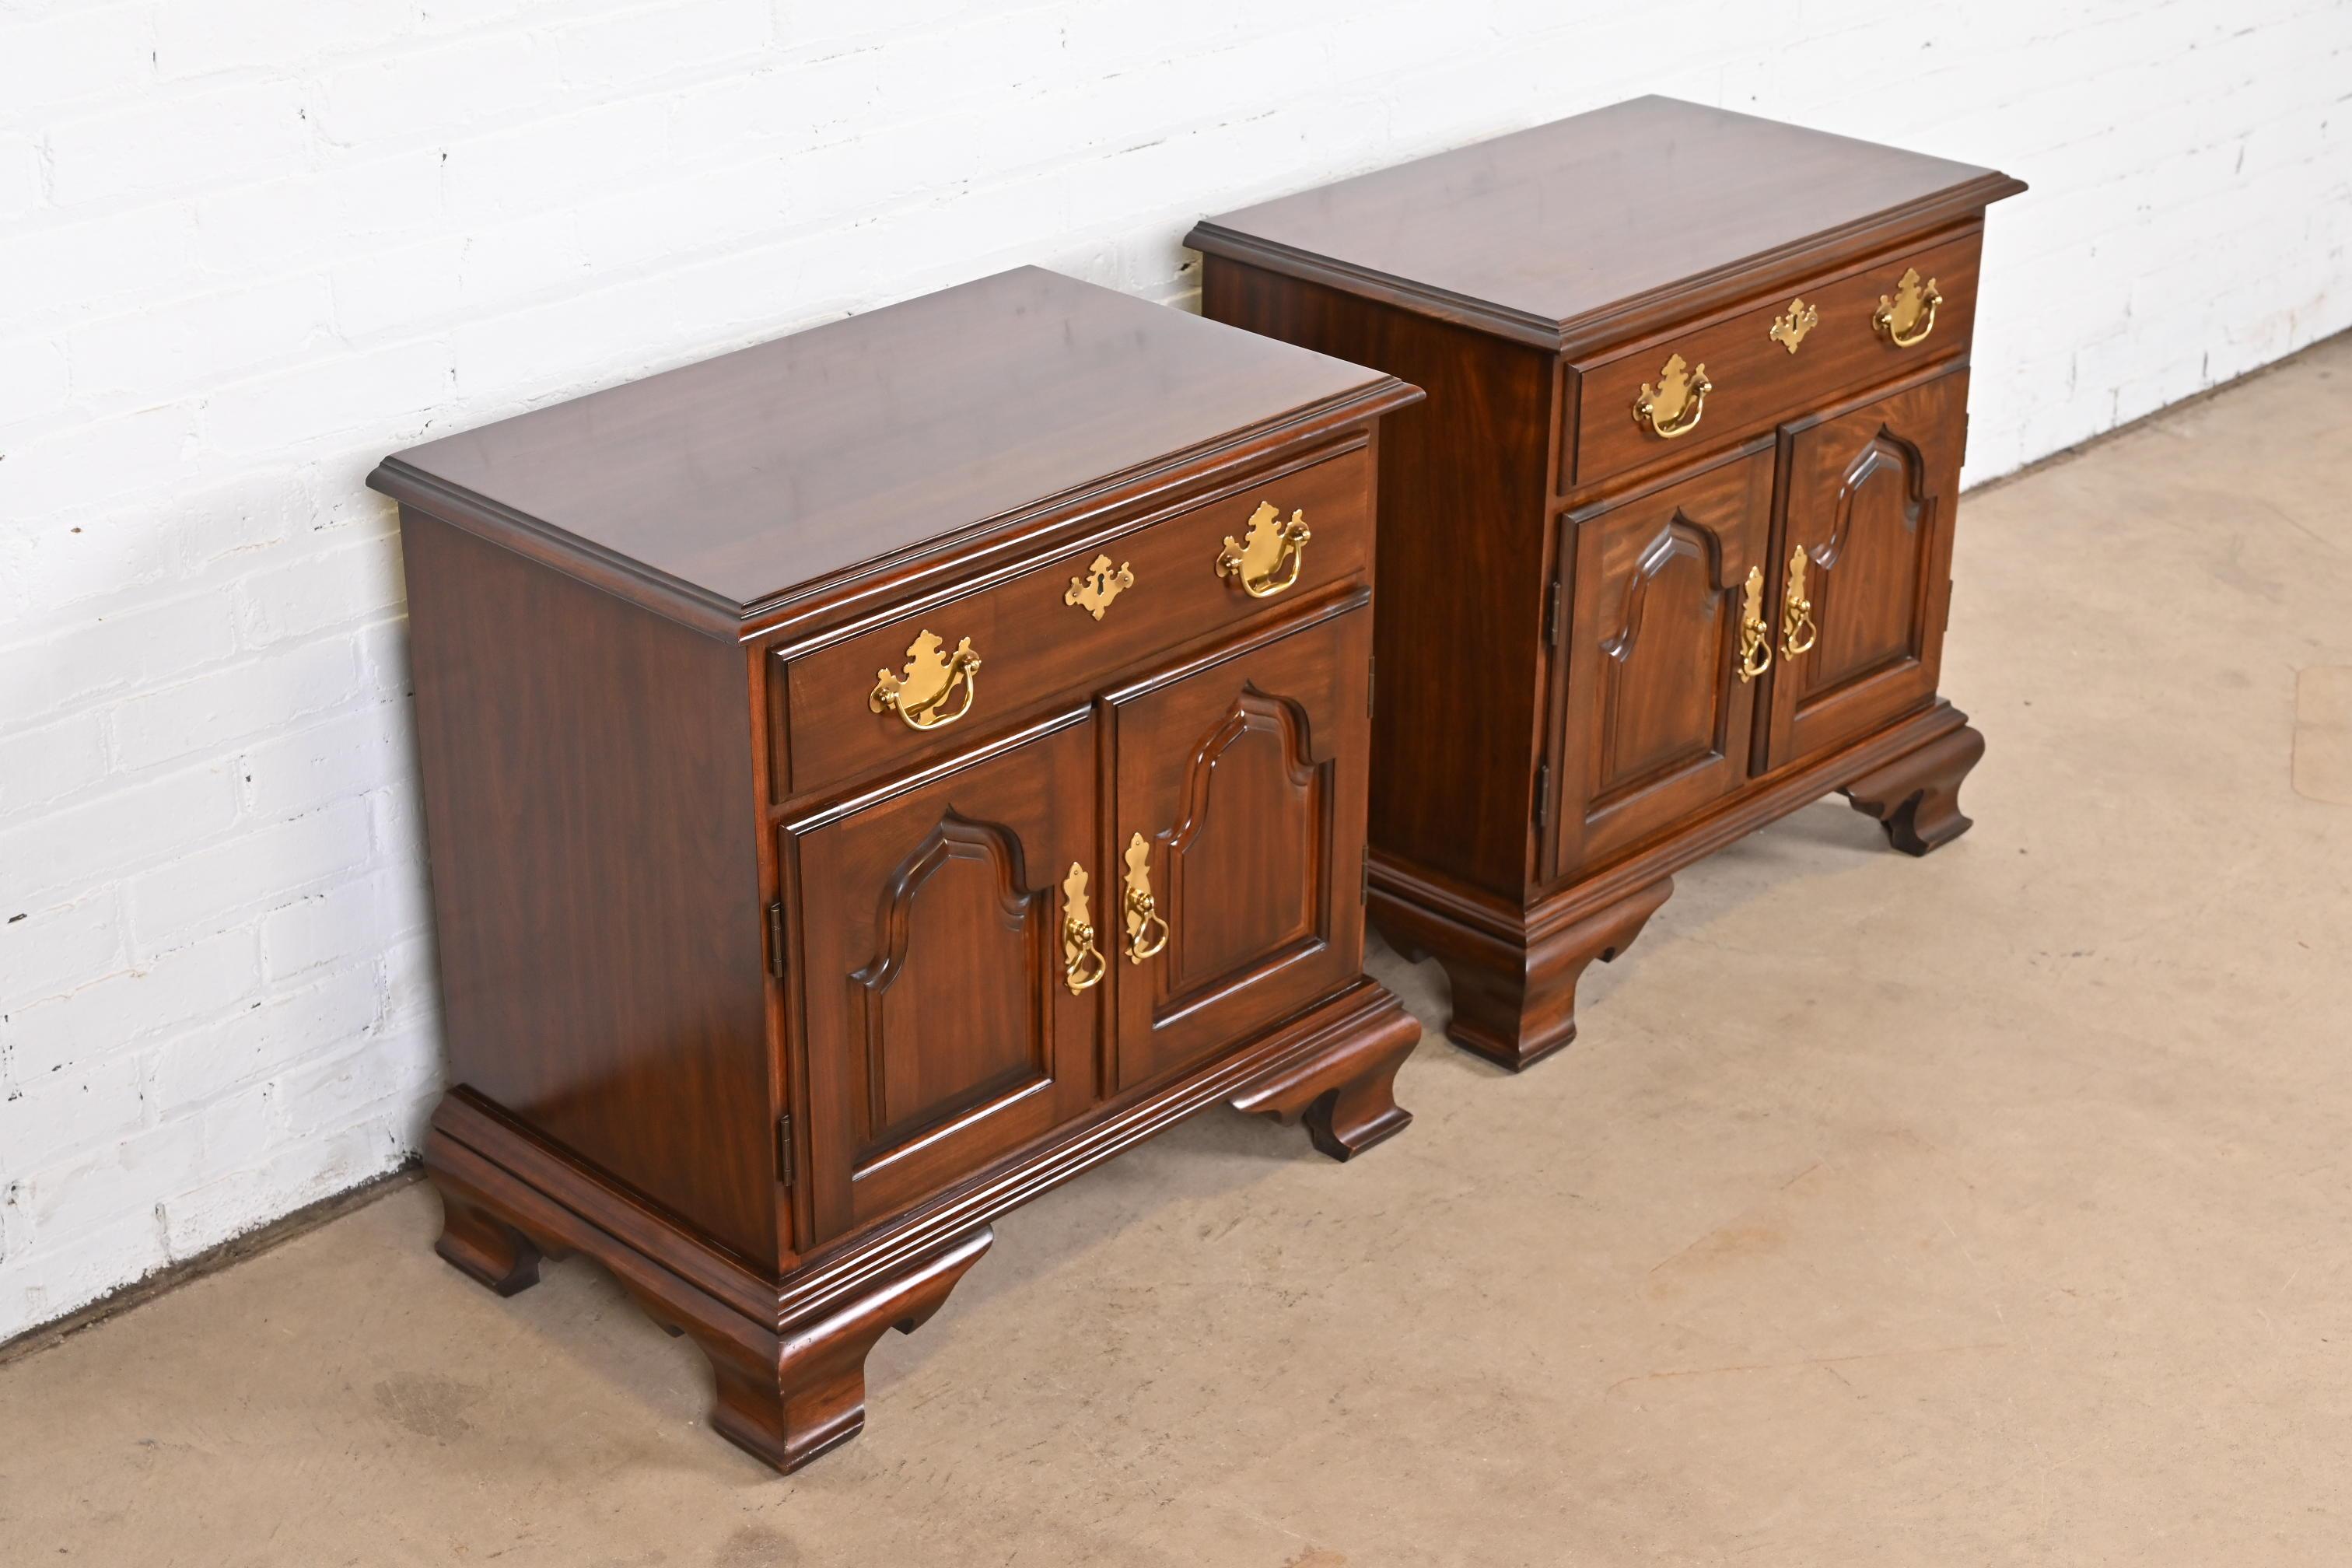 20th Century Harden Furniture Georgian Solid Cherry Wood Nightstands, Pair For Sale